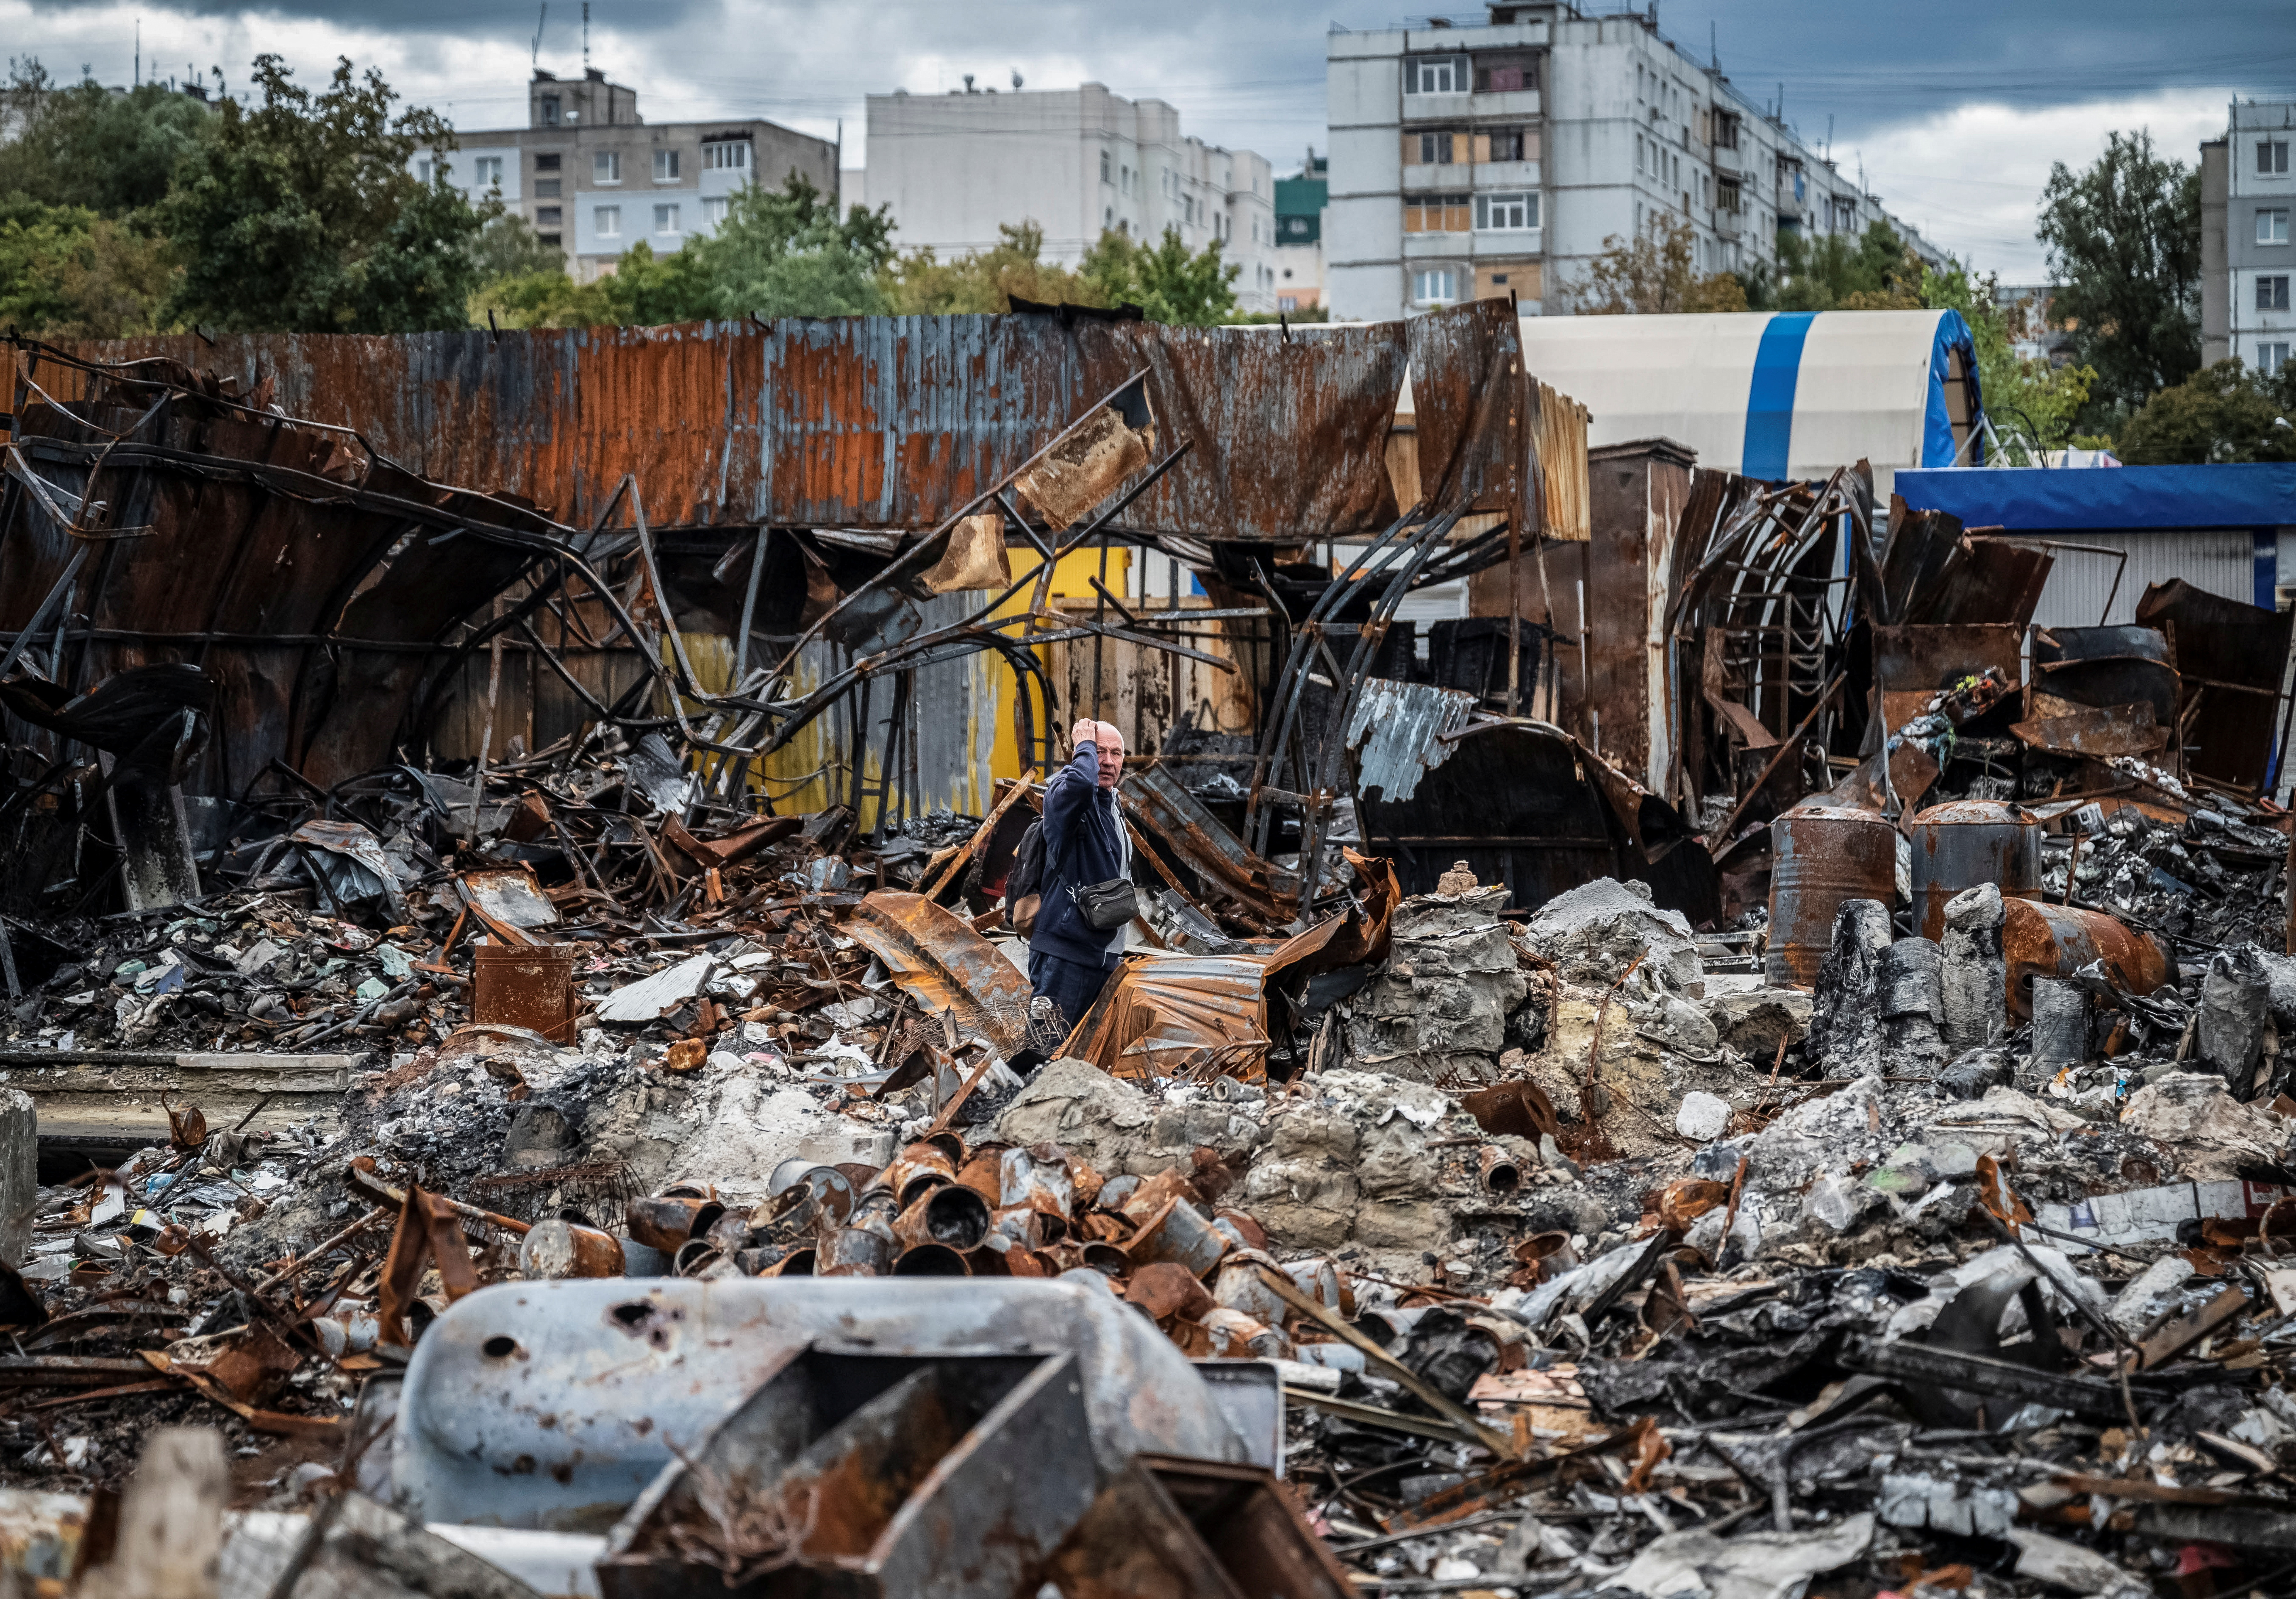 A local resident walks by a street market destroyed by military strikes, in Saltivka, one of the most damaged residential areas of Kharkiv